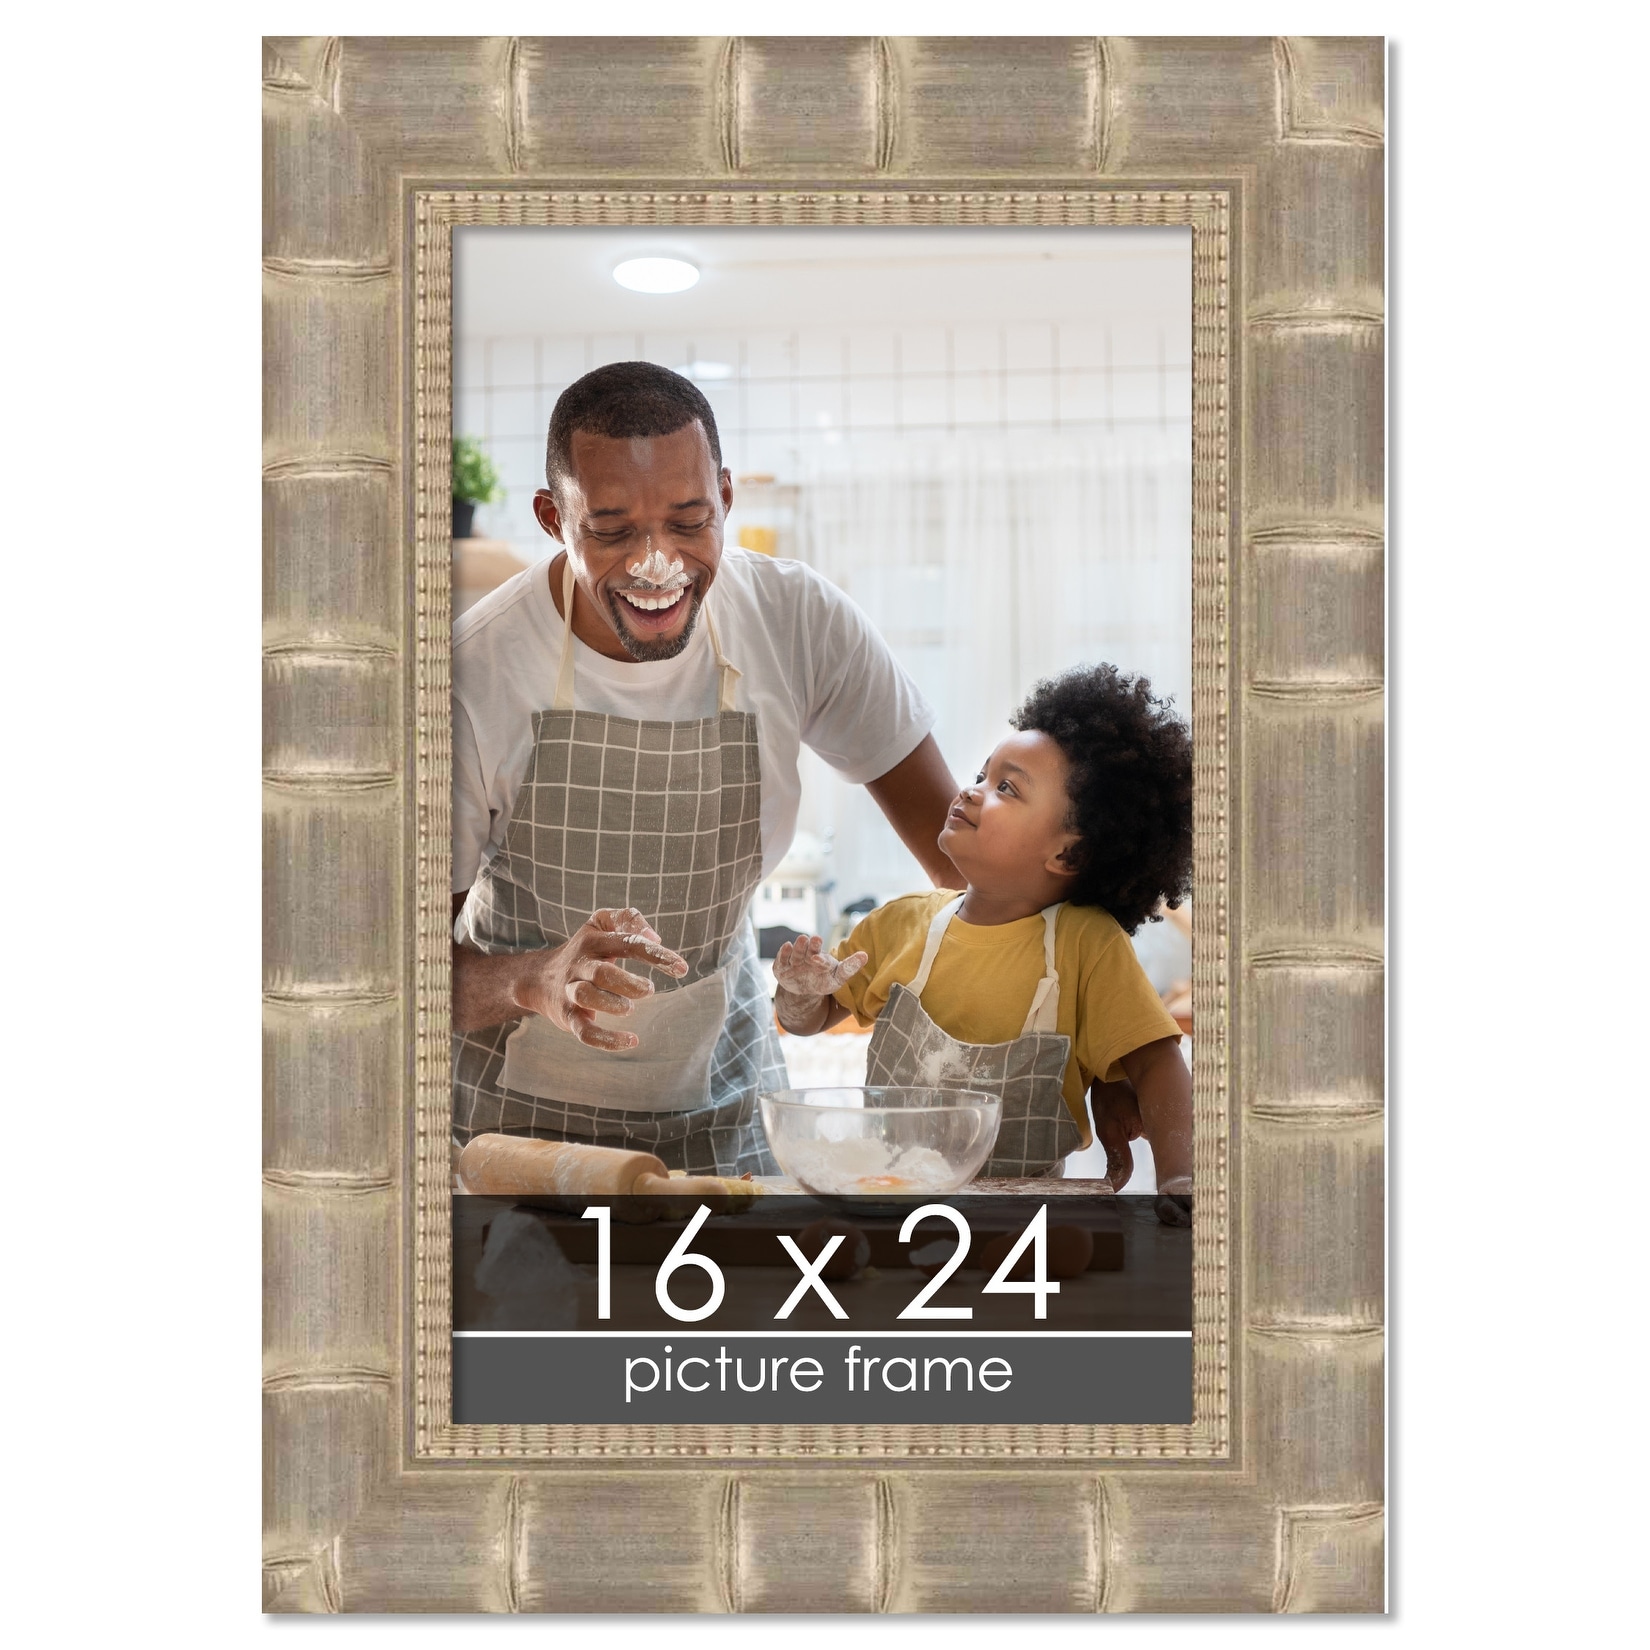 16x24 Picture Frame